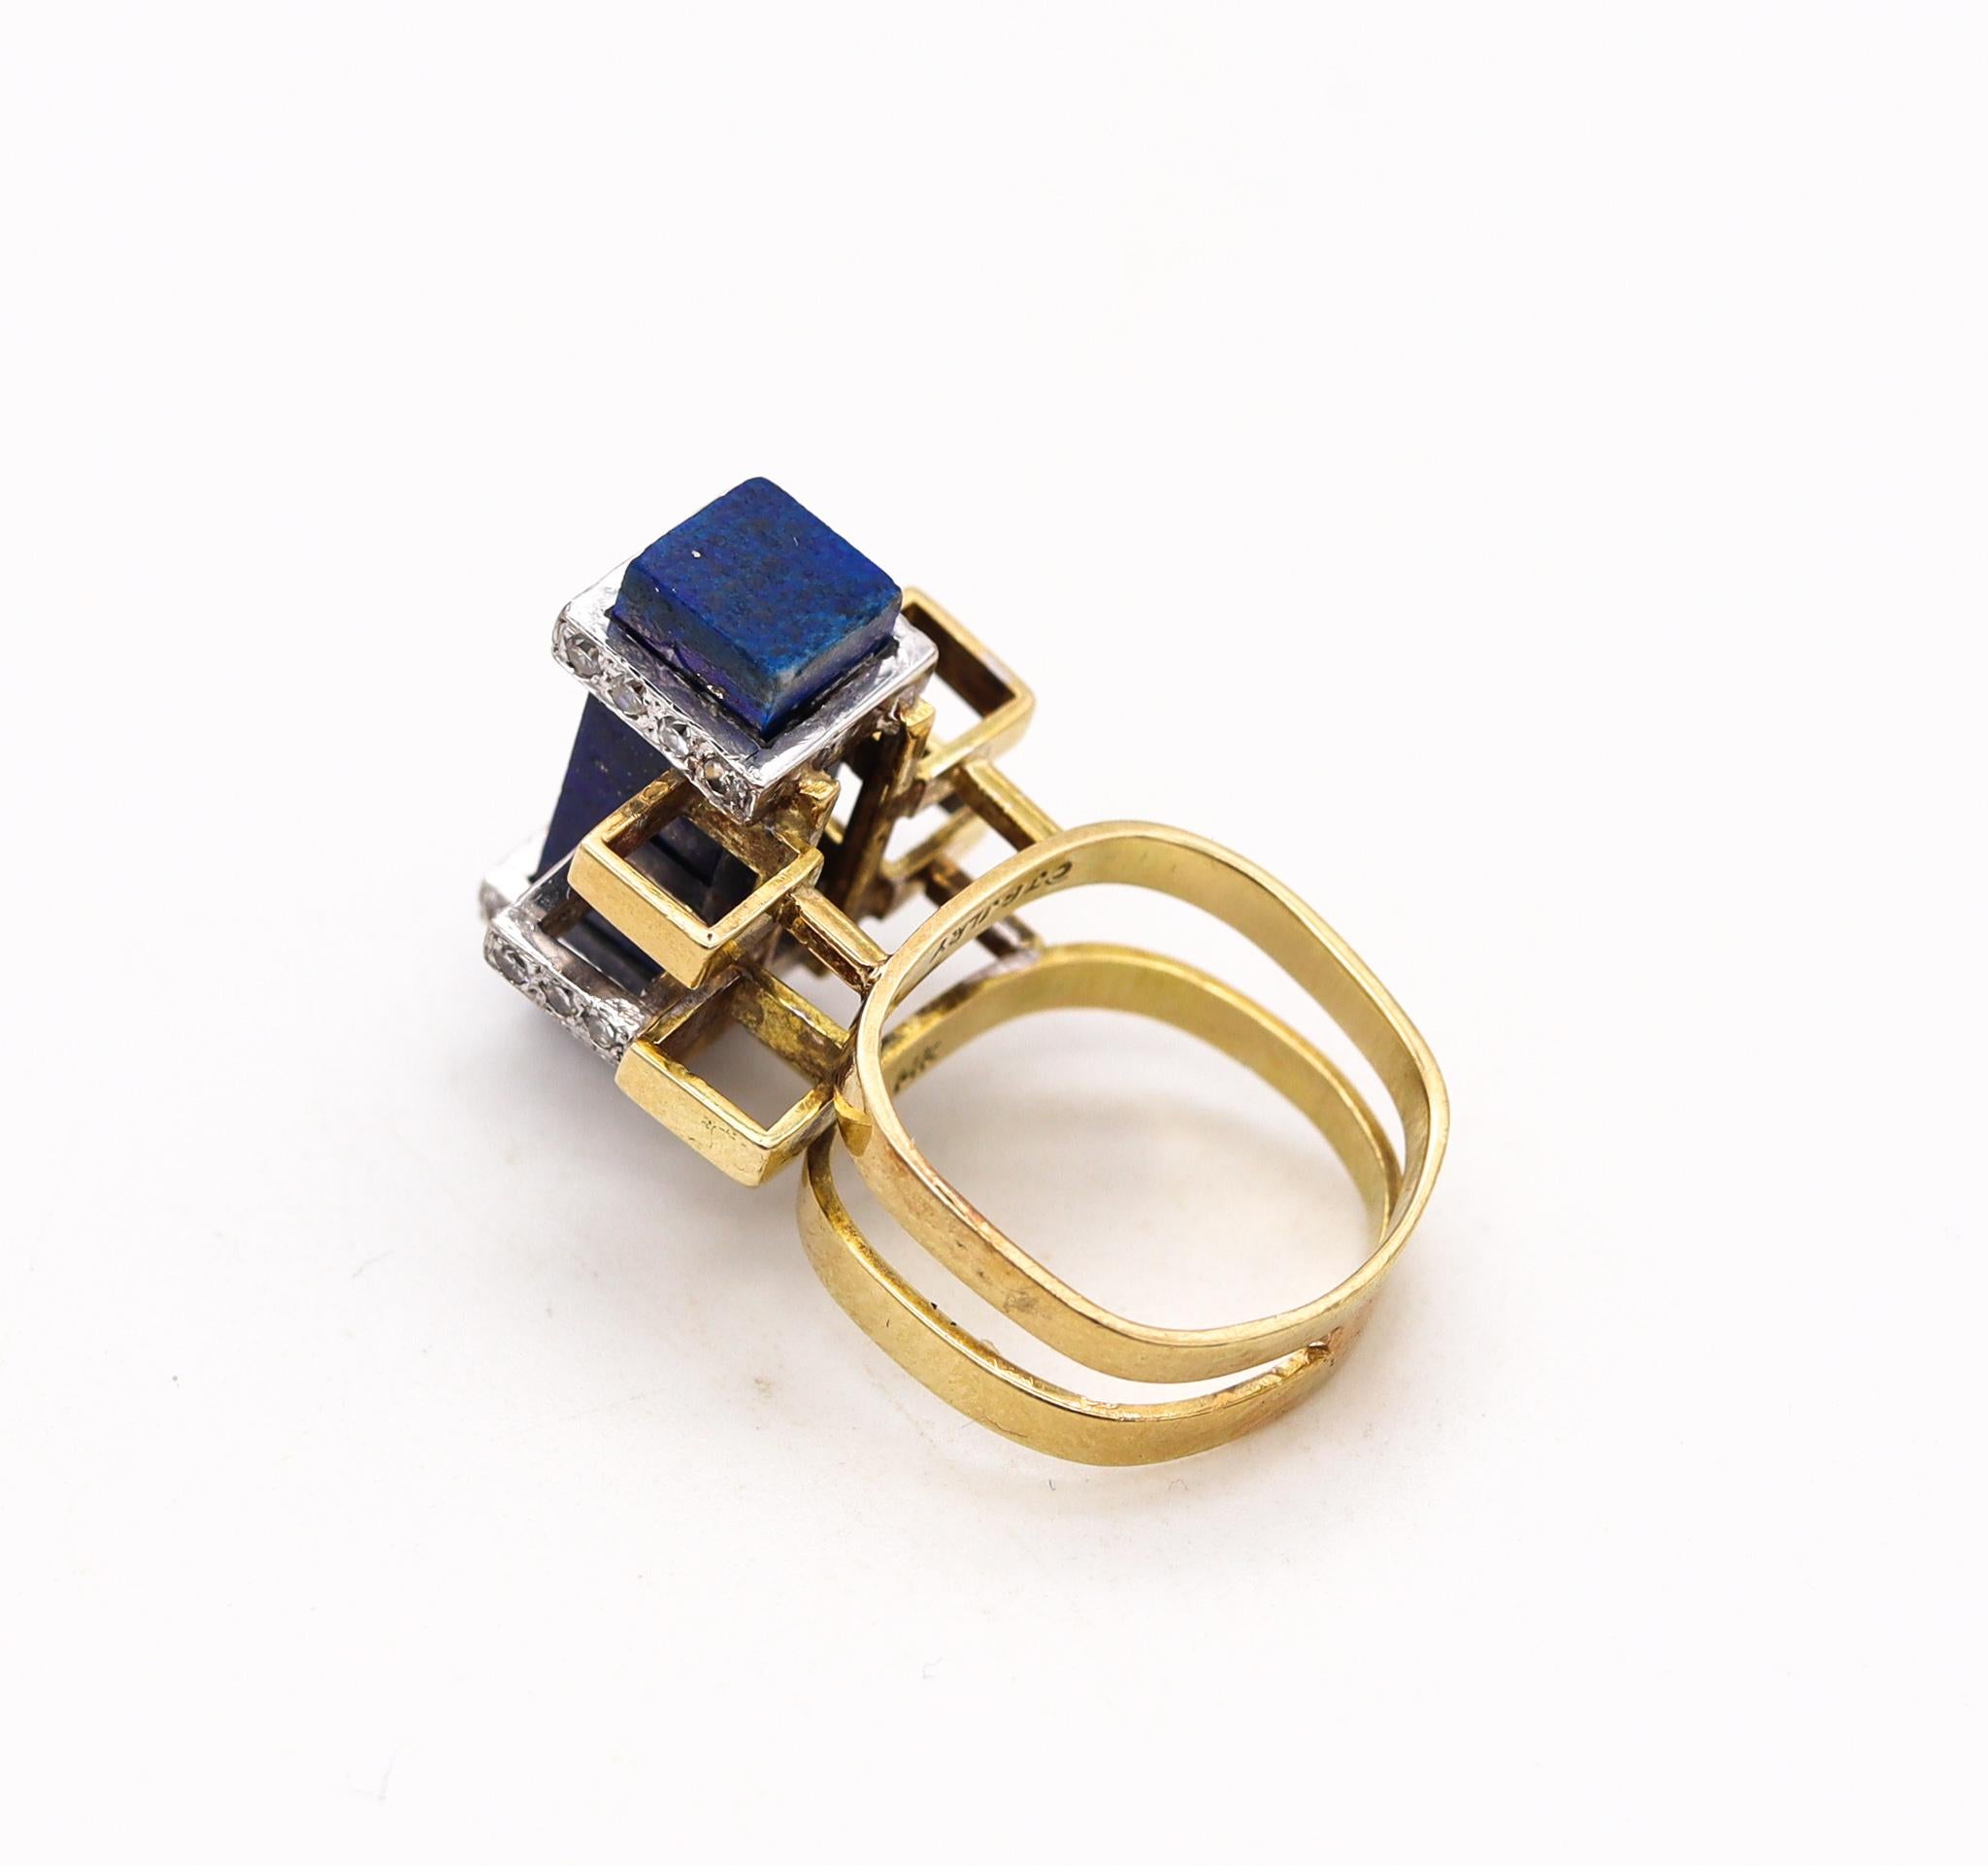 Geometric ring designed by Jack Gutschneider.

Beautiful sculptural piece of cubism art, created by the American artist and jewelry designer Gutschneider, back in the early 1960's. This one-of-a-kind geometric ring has been carefully assembled in